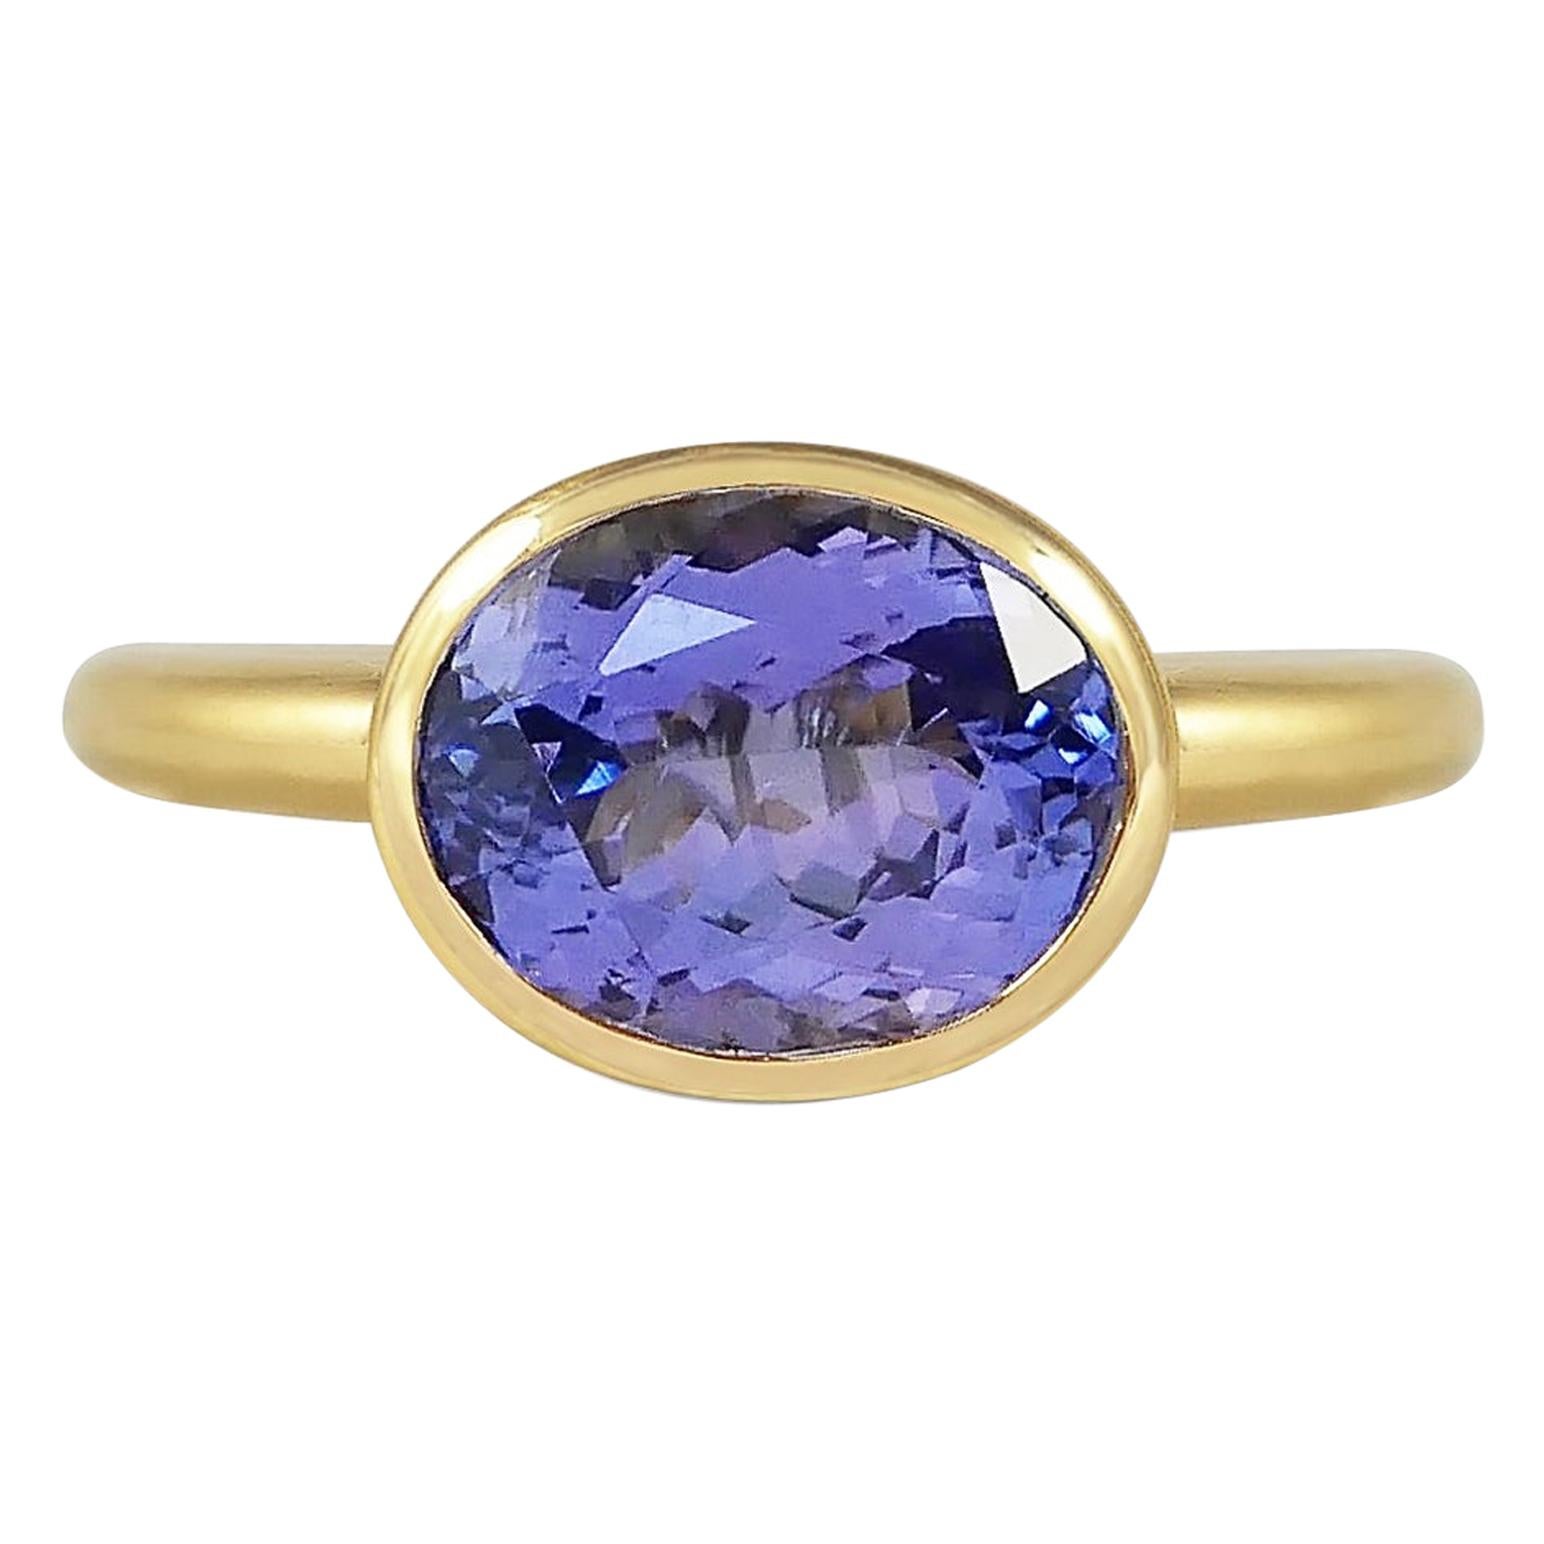 Handcrafted Oval Cut 4.70 Carats Tanzanite 18 Karat Yellow Gold Cocktail Ring